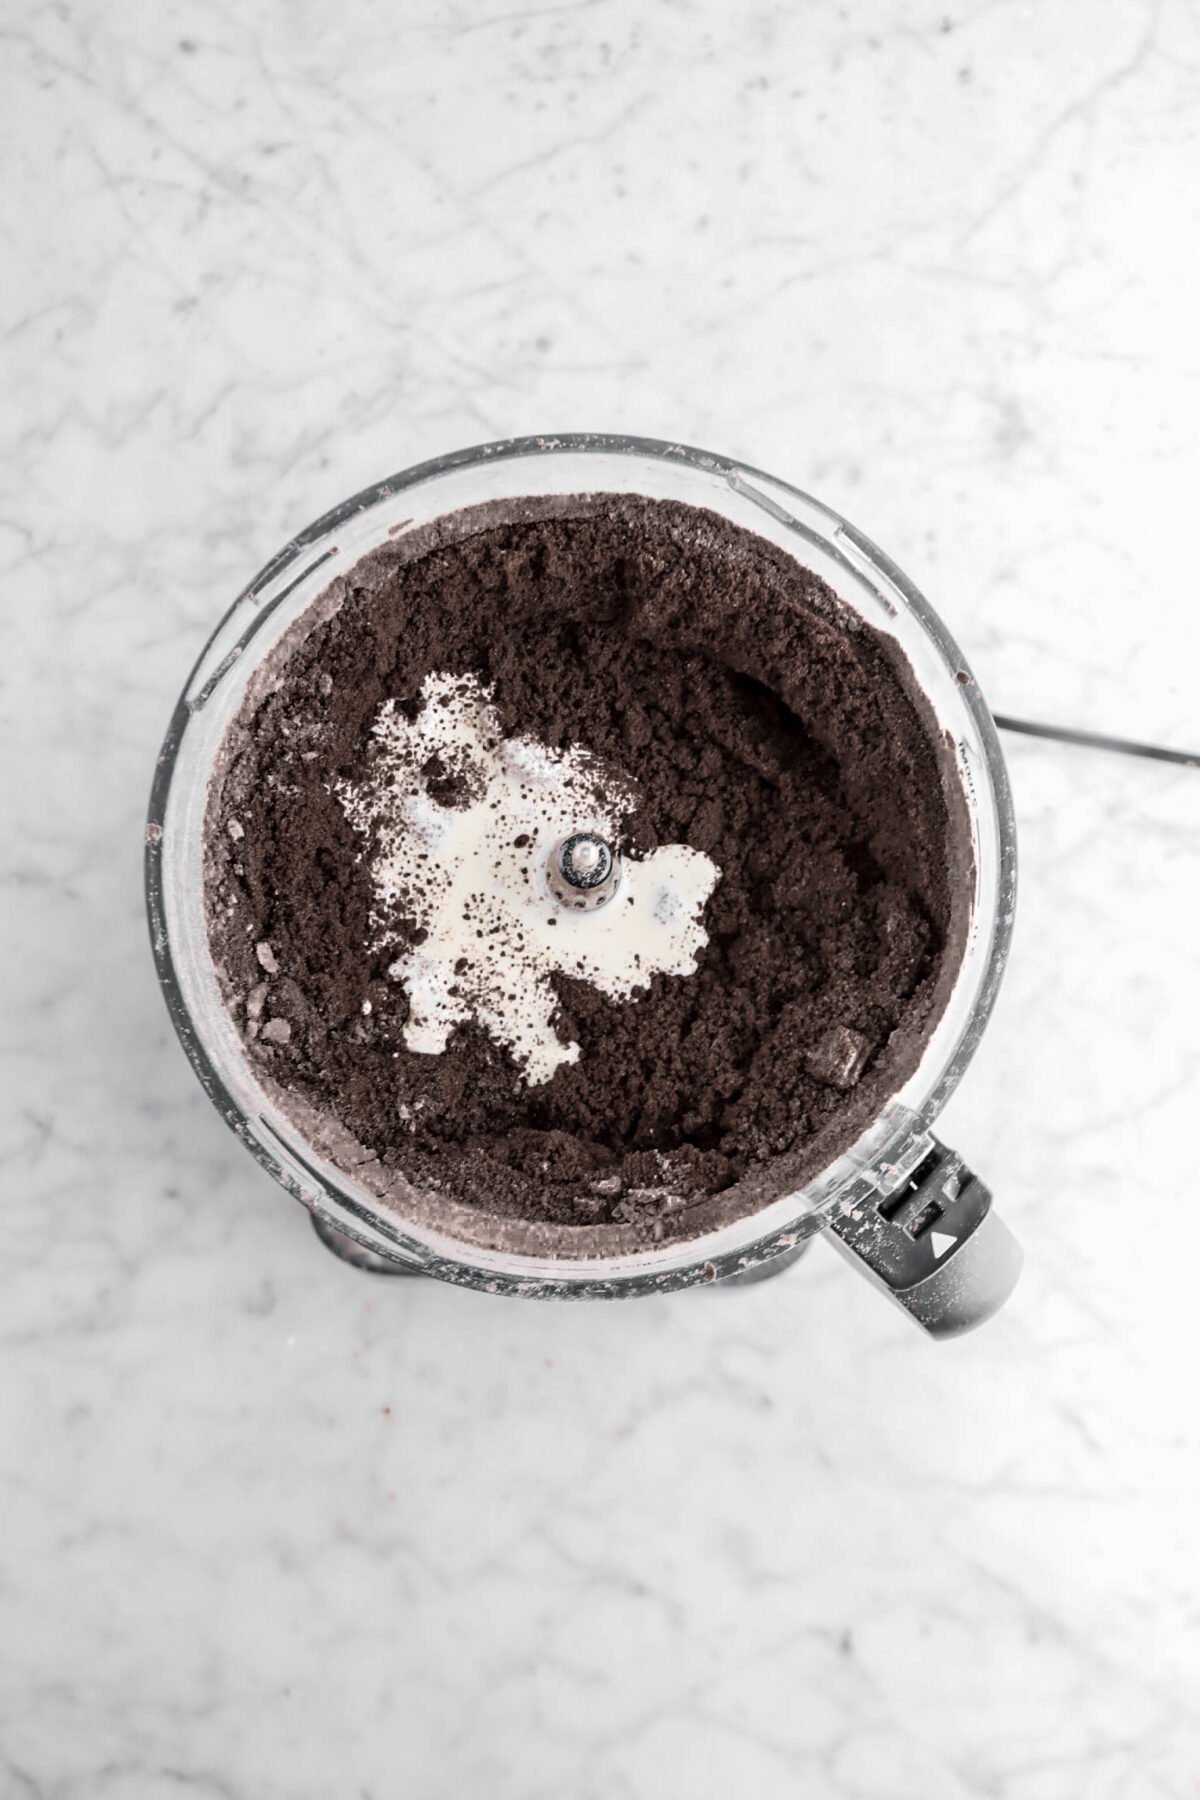 milk added to cocoa powder mixture.